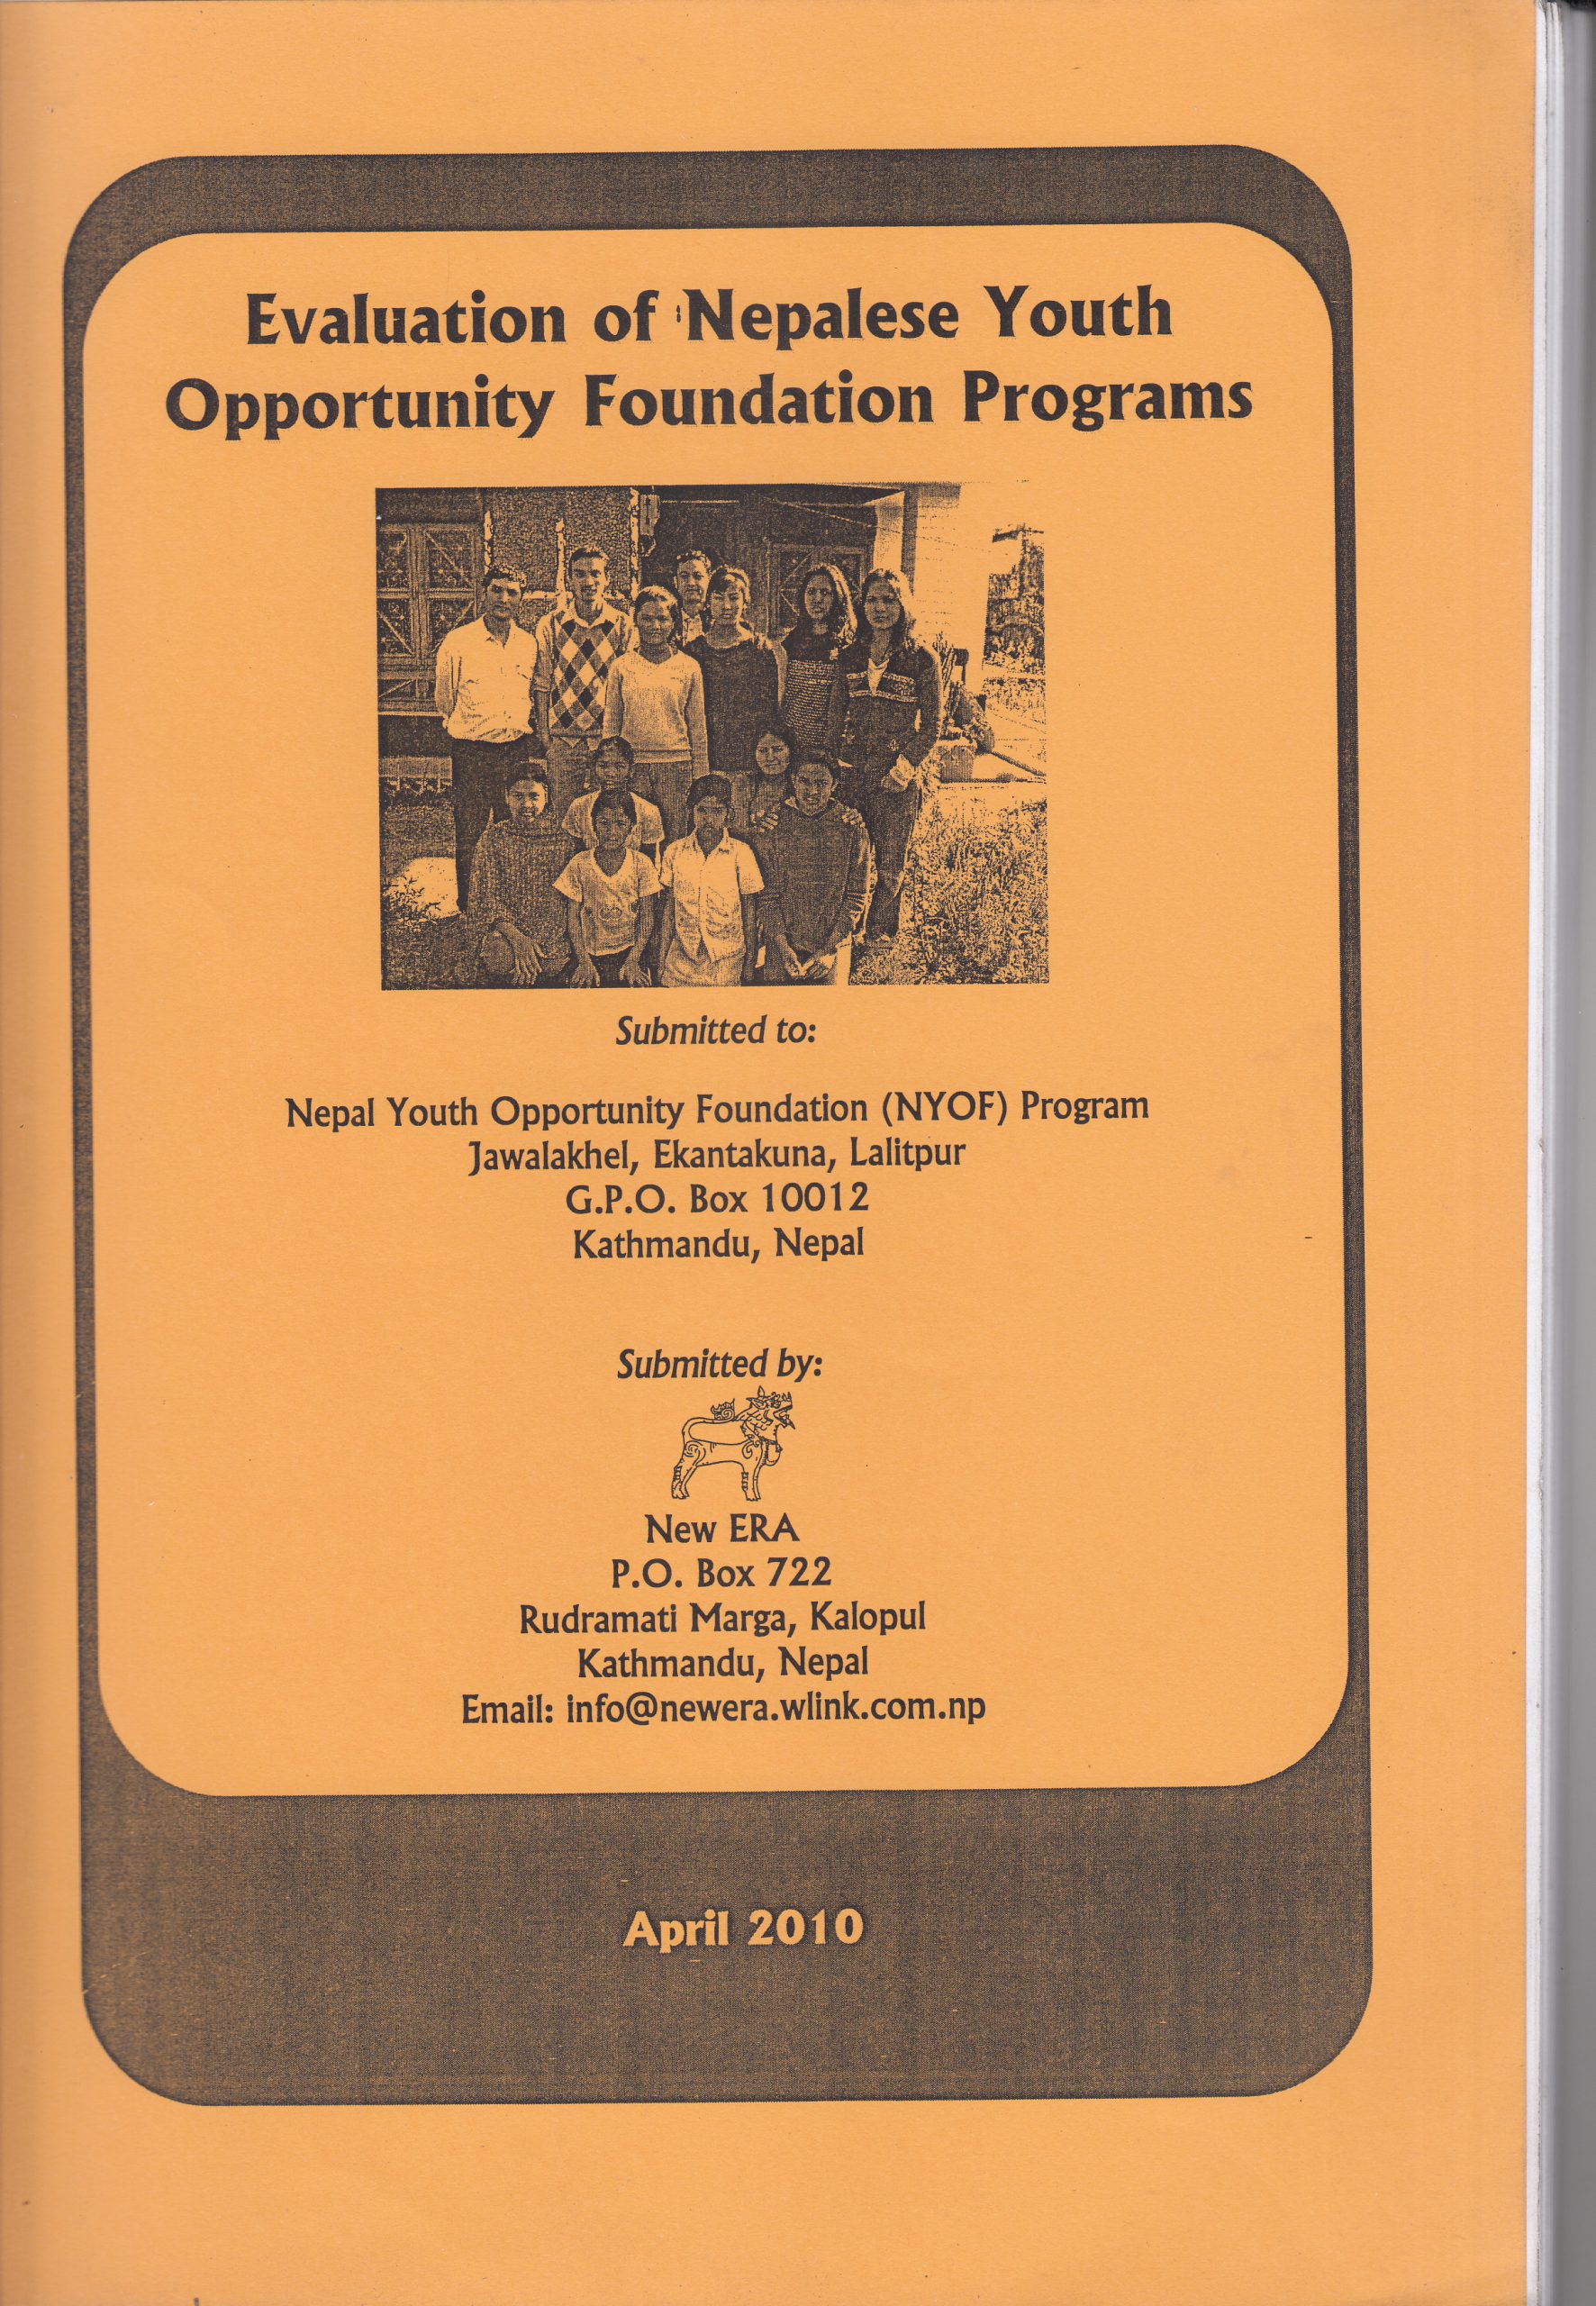 Evaluation of Nepalese Youth Opportunity Foundation Programs